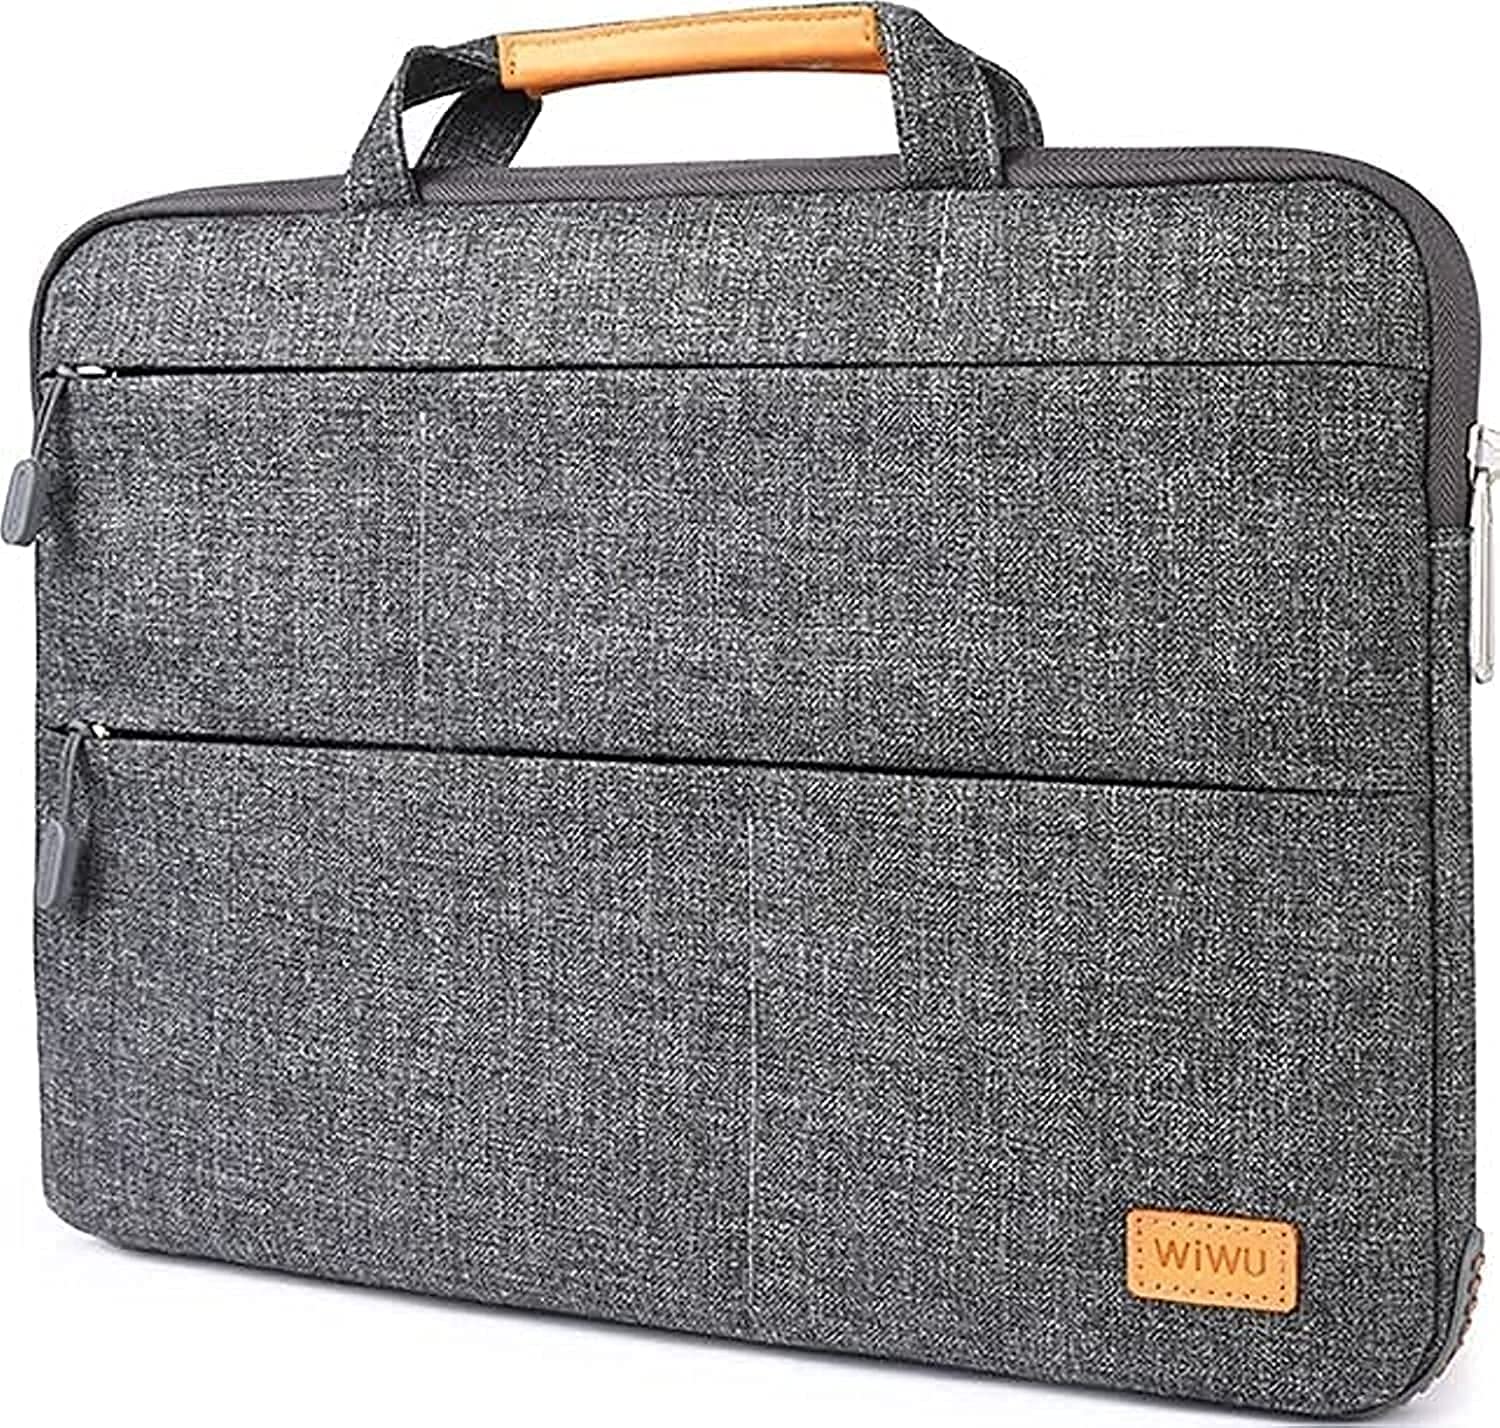 WIWU Smart Stand Sleeve For 15.4 inch Air MacBook/Laptop Bag -Gray